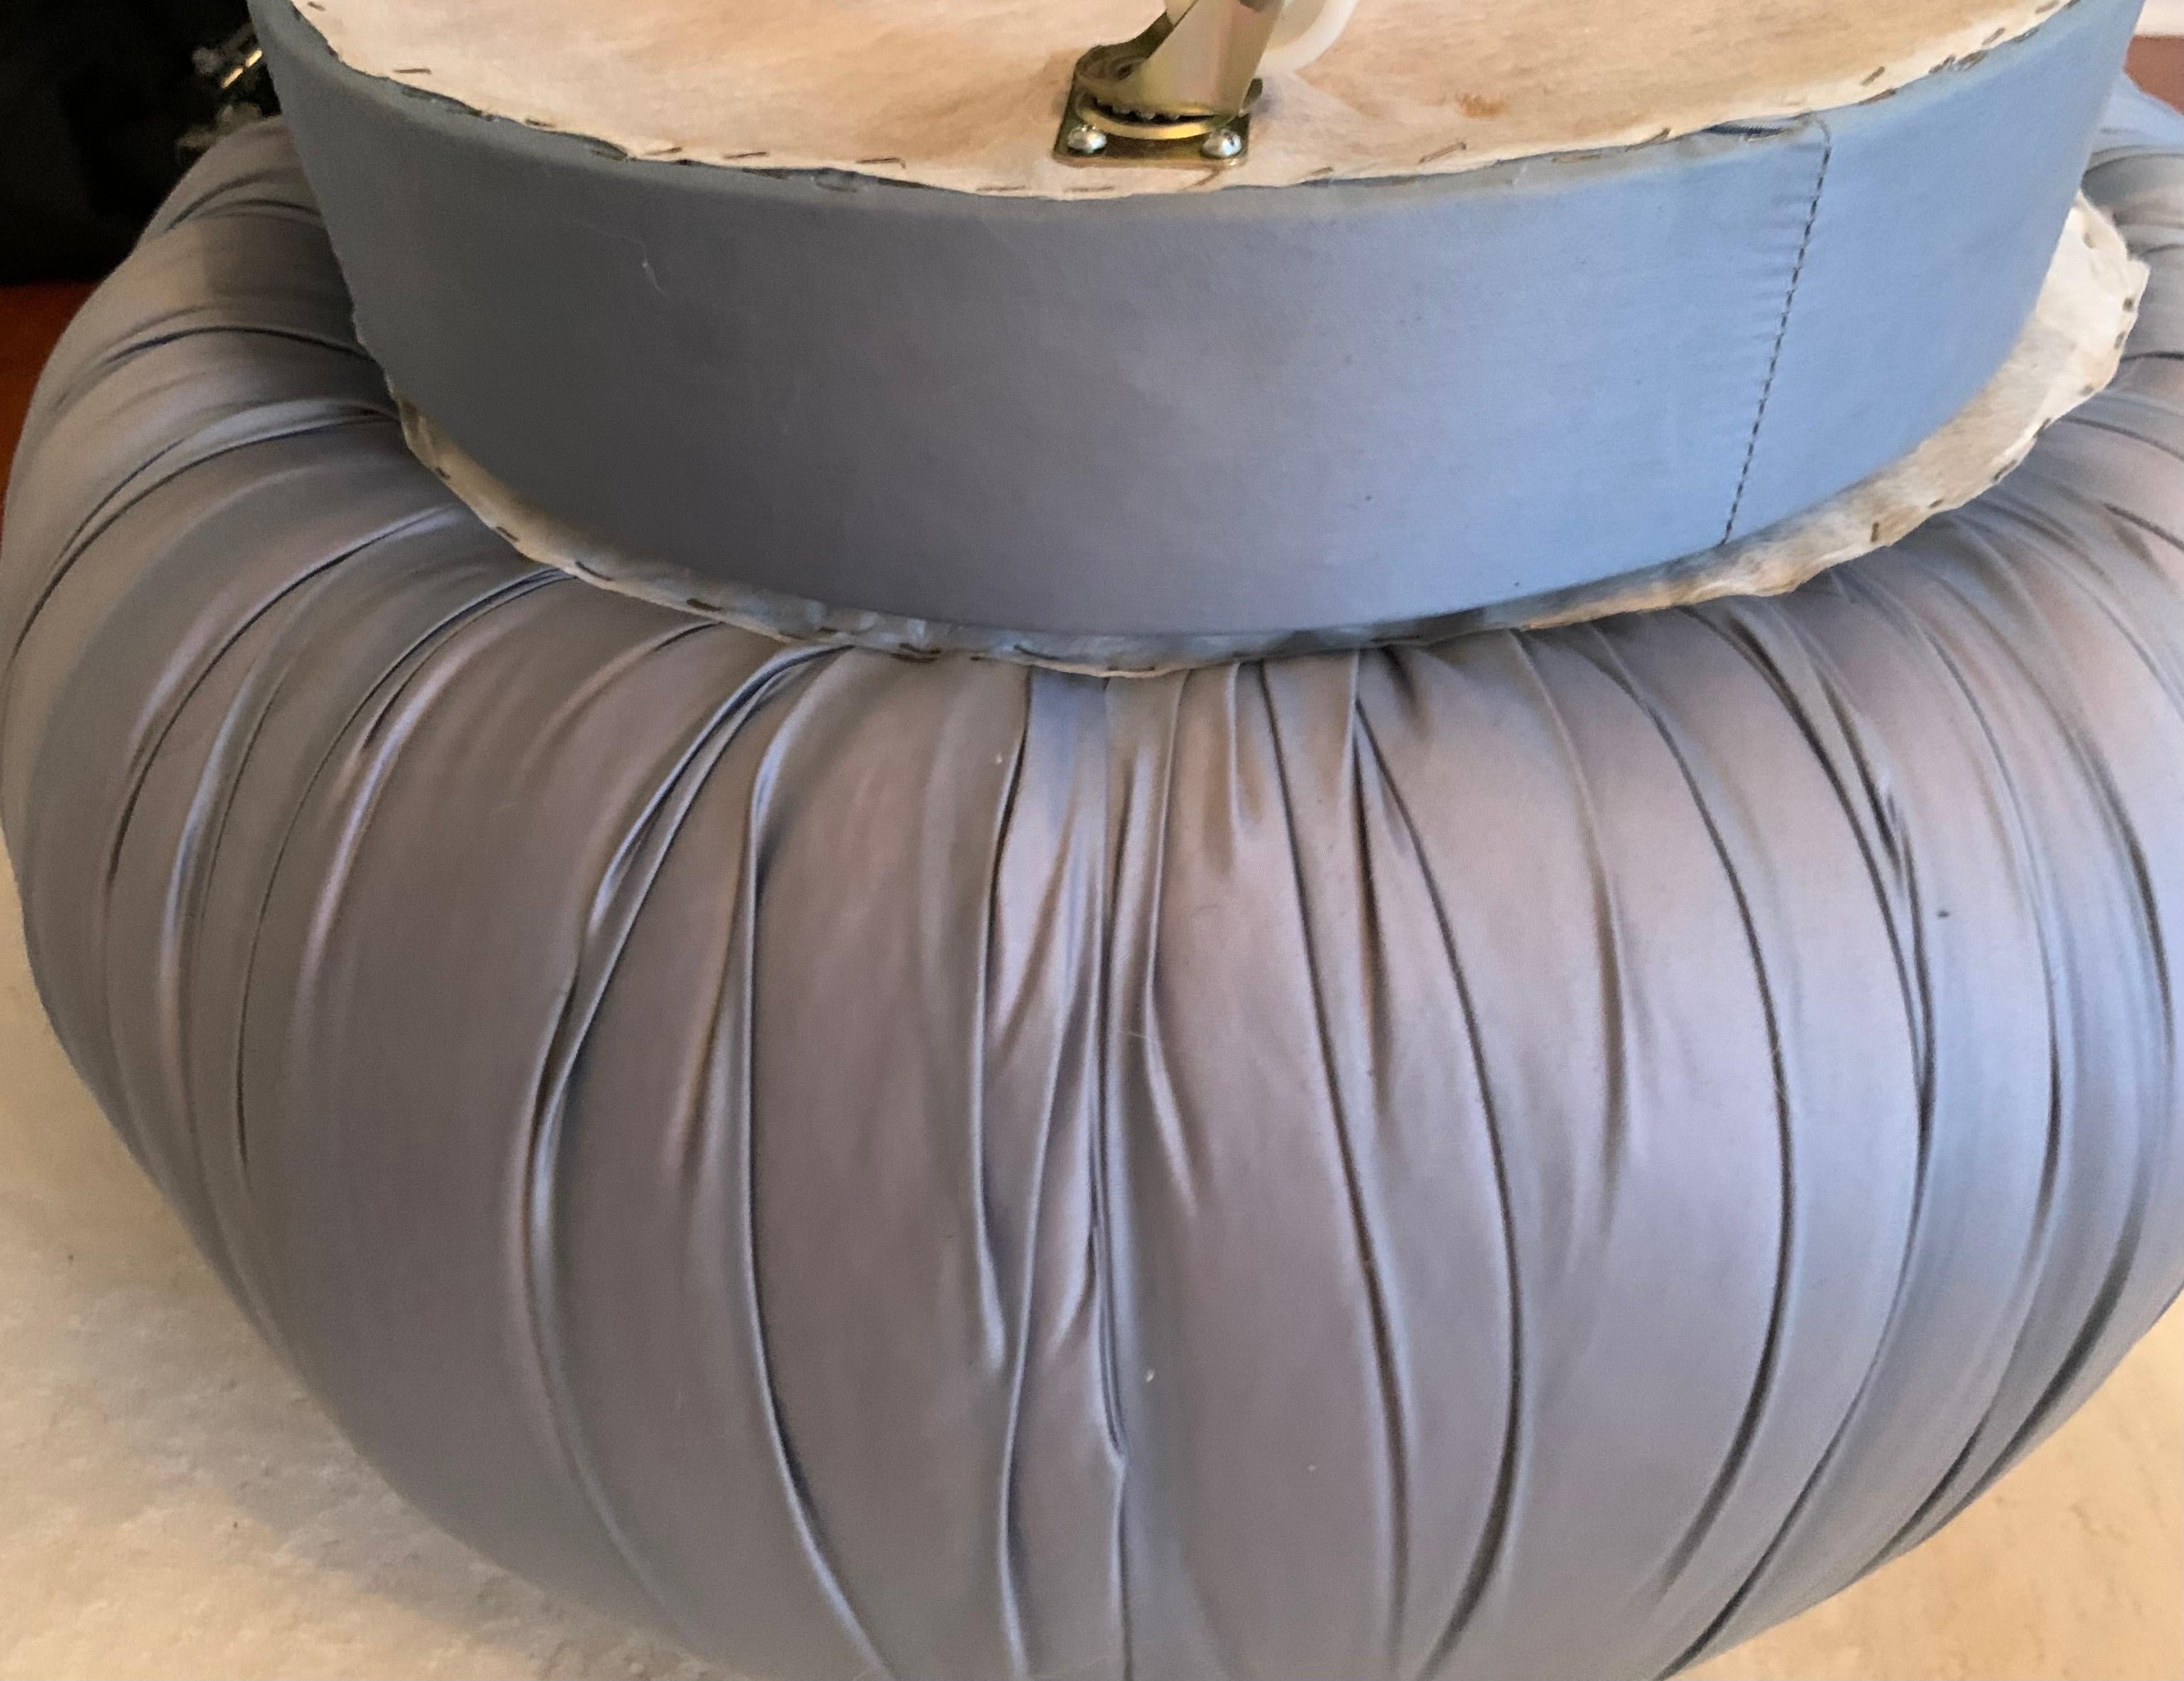 American 1990s Postmodern Round Pouf Ottoman Footstool attr. to Kagan for Directional For Sale